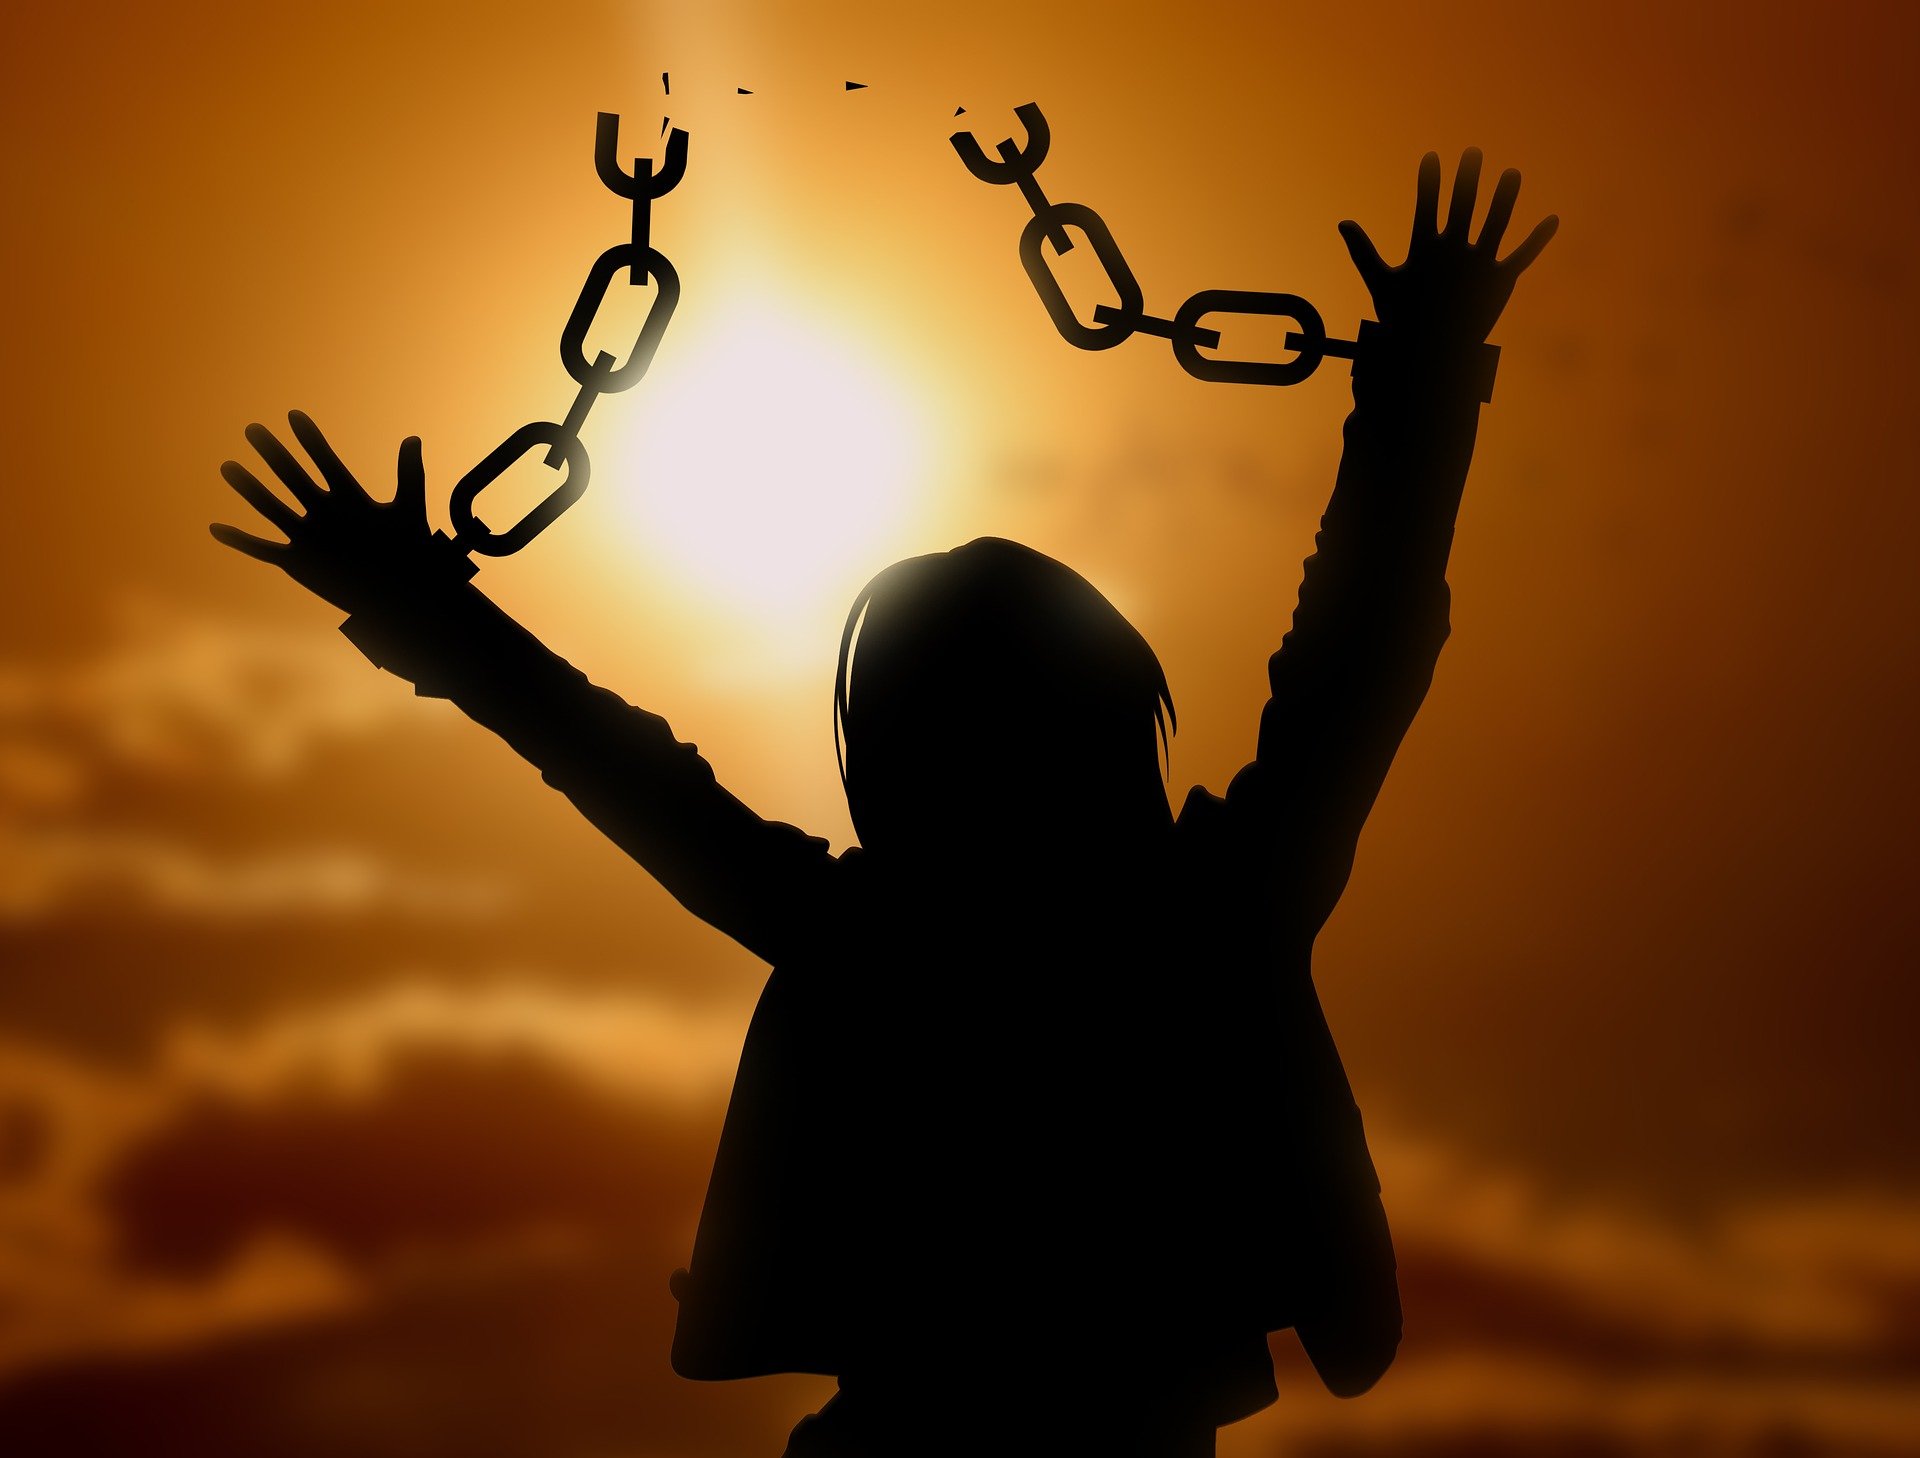 break free from chains